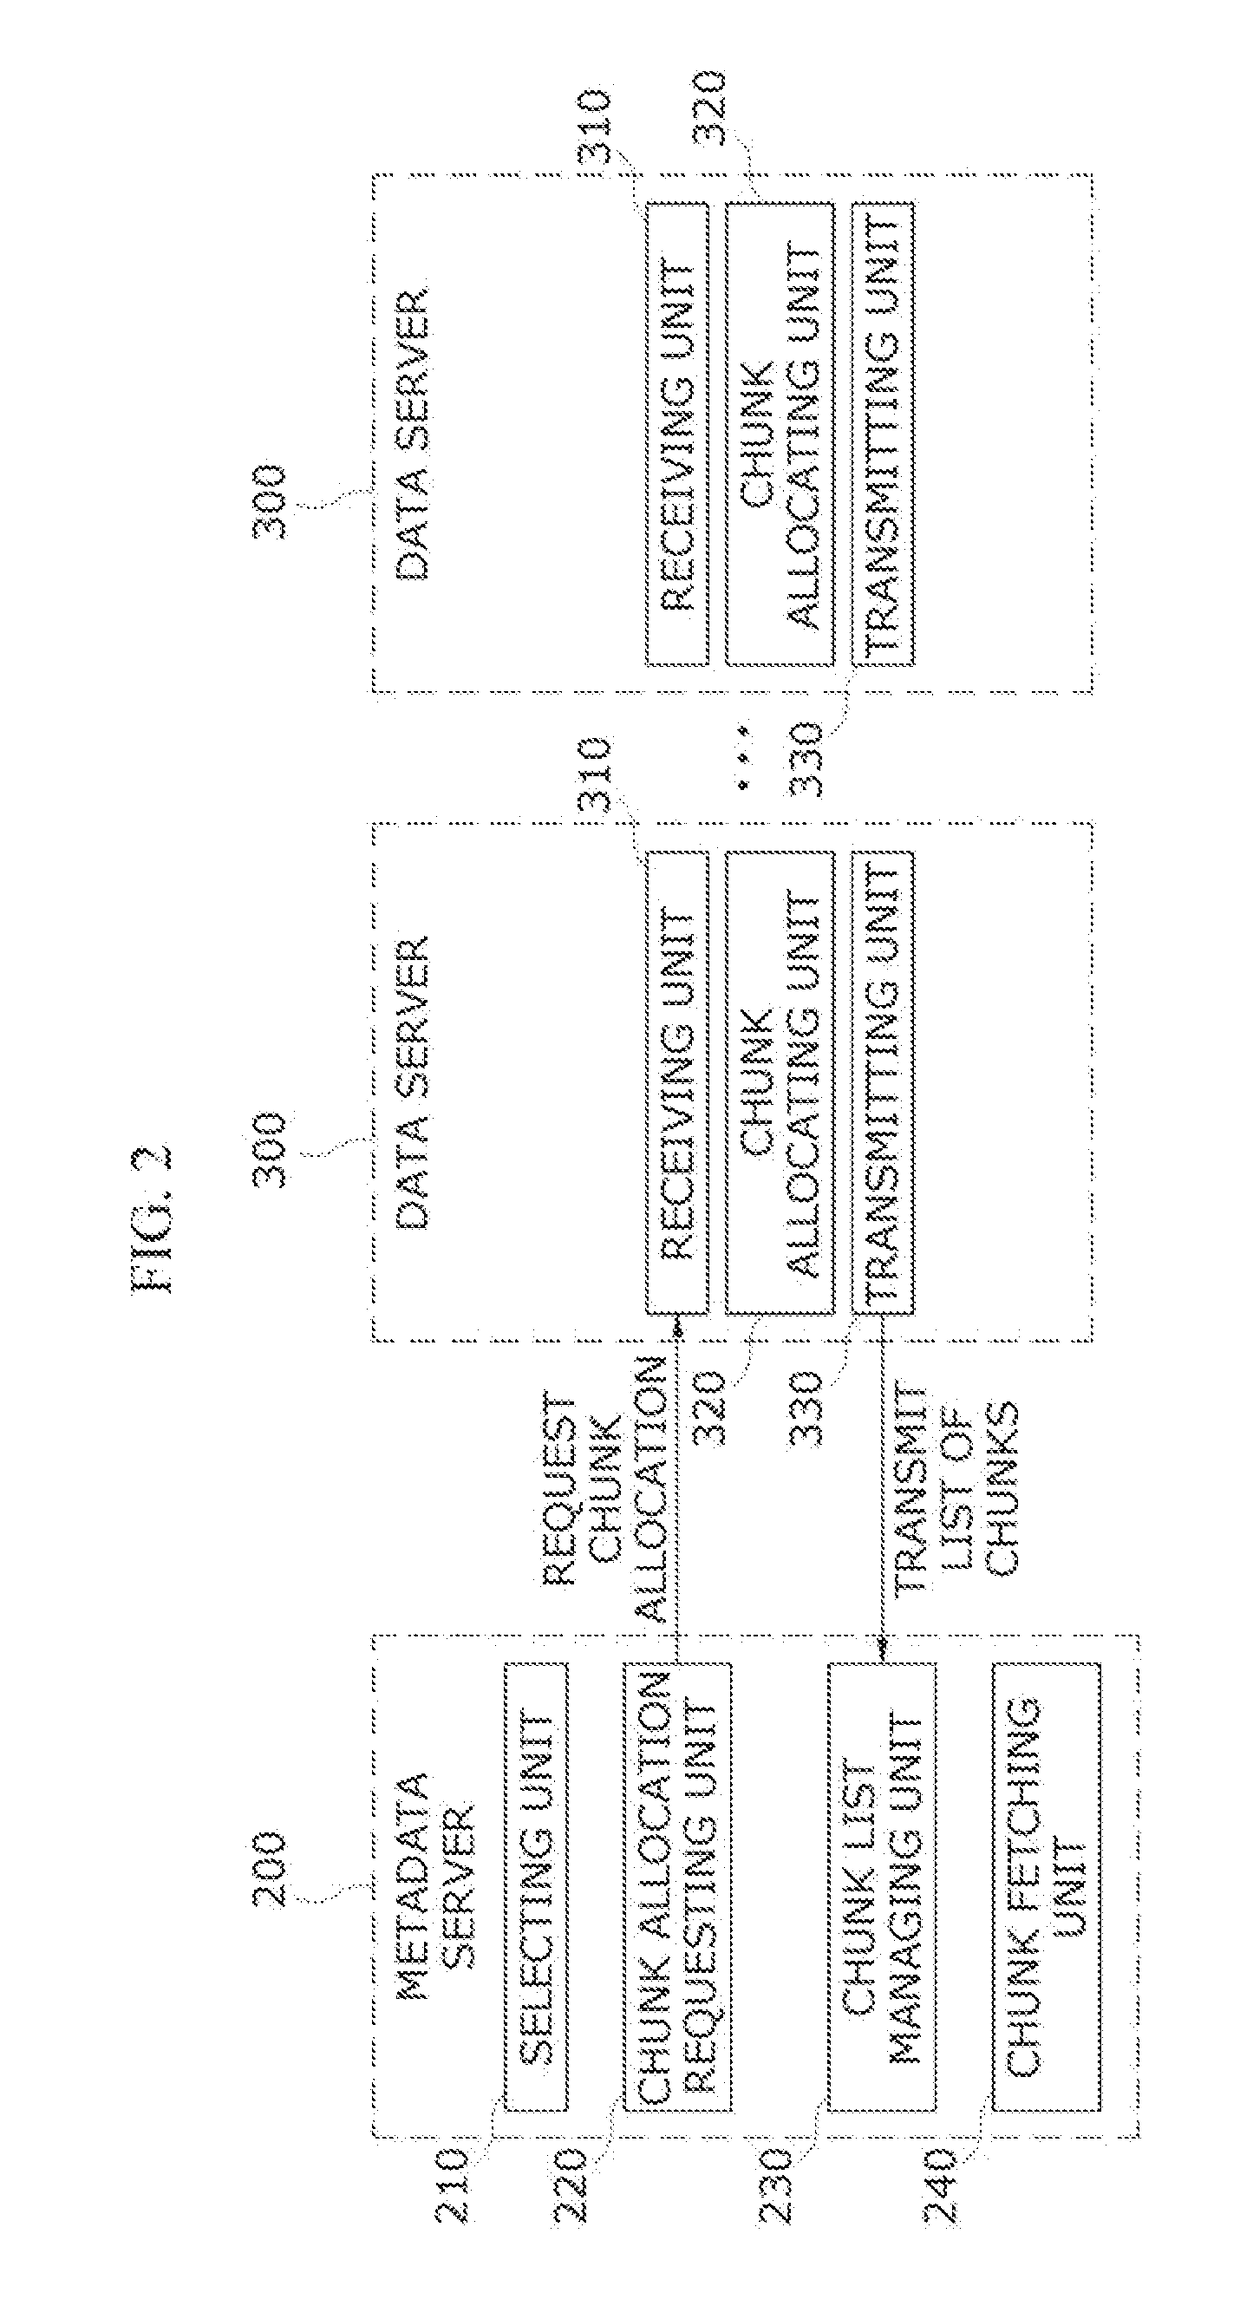 Distributed file system and method of creating files effectively